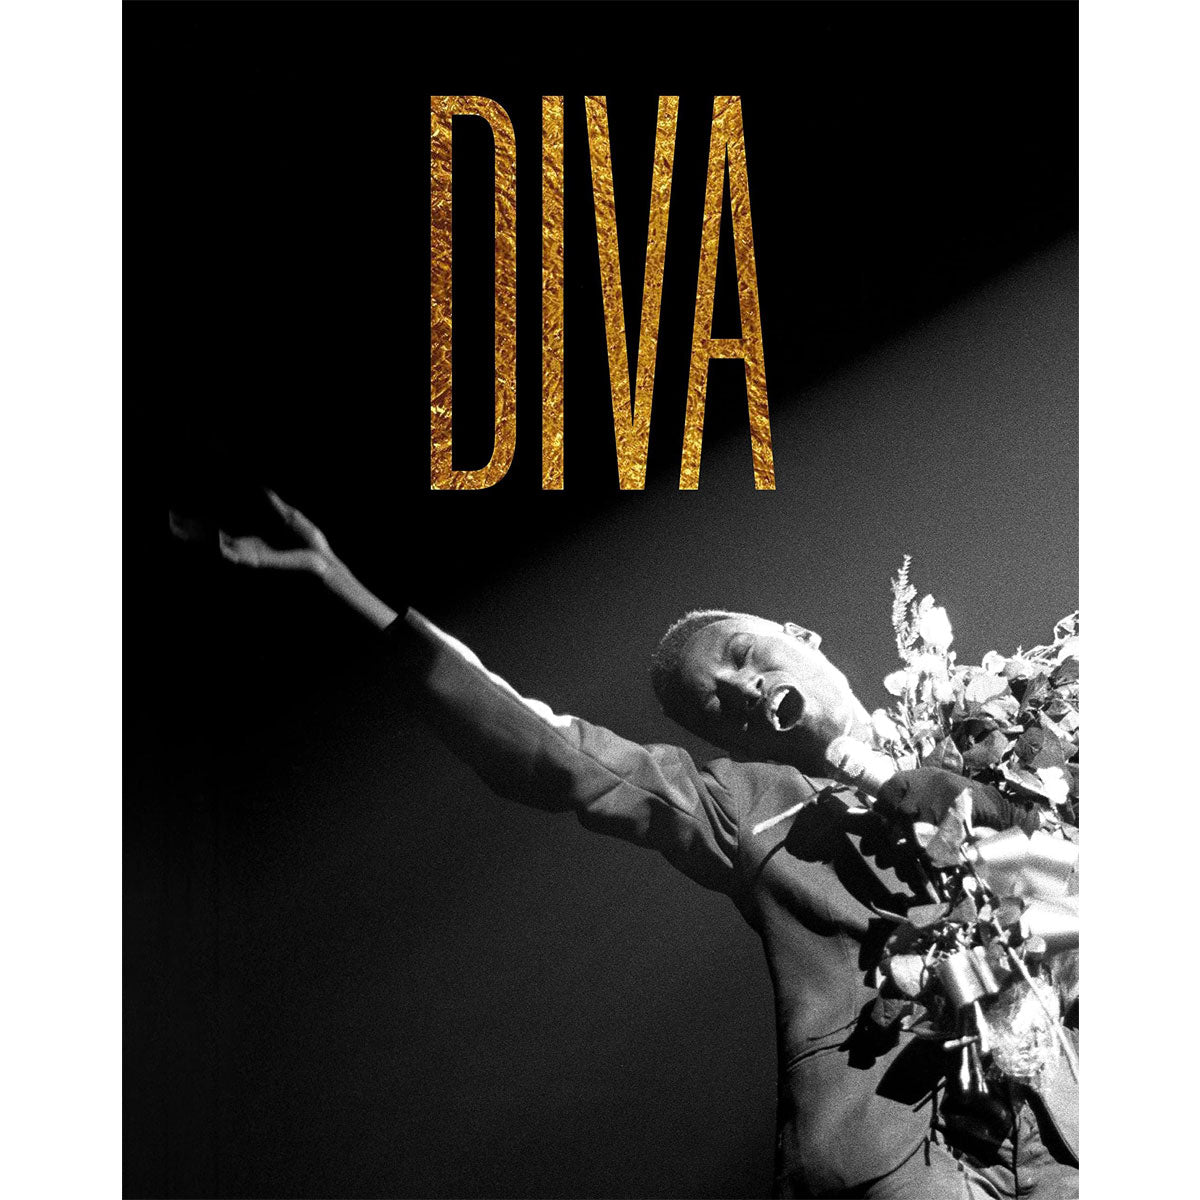 Diva by Kate Bailey